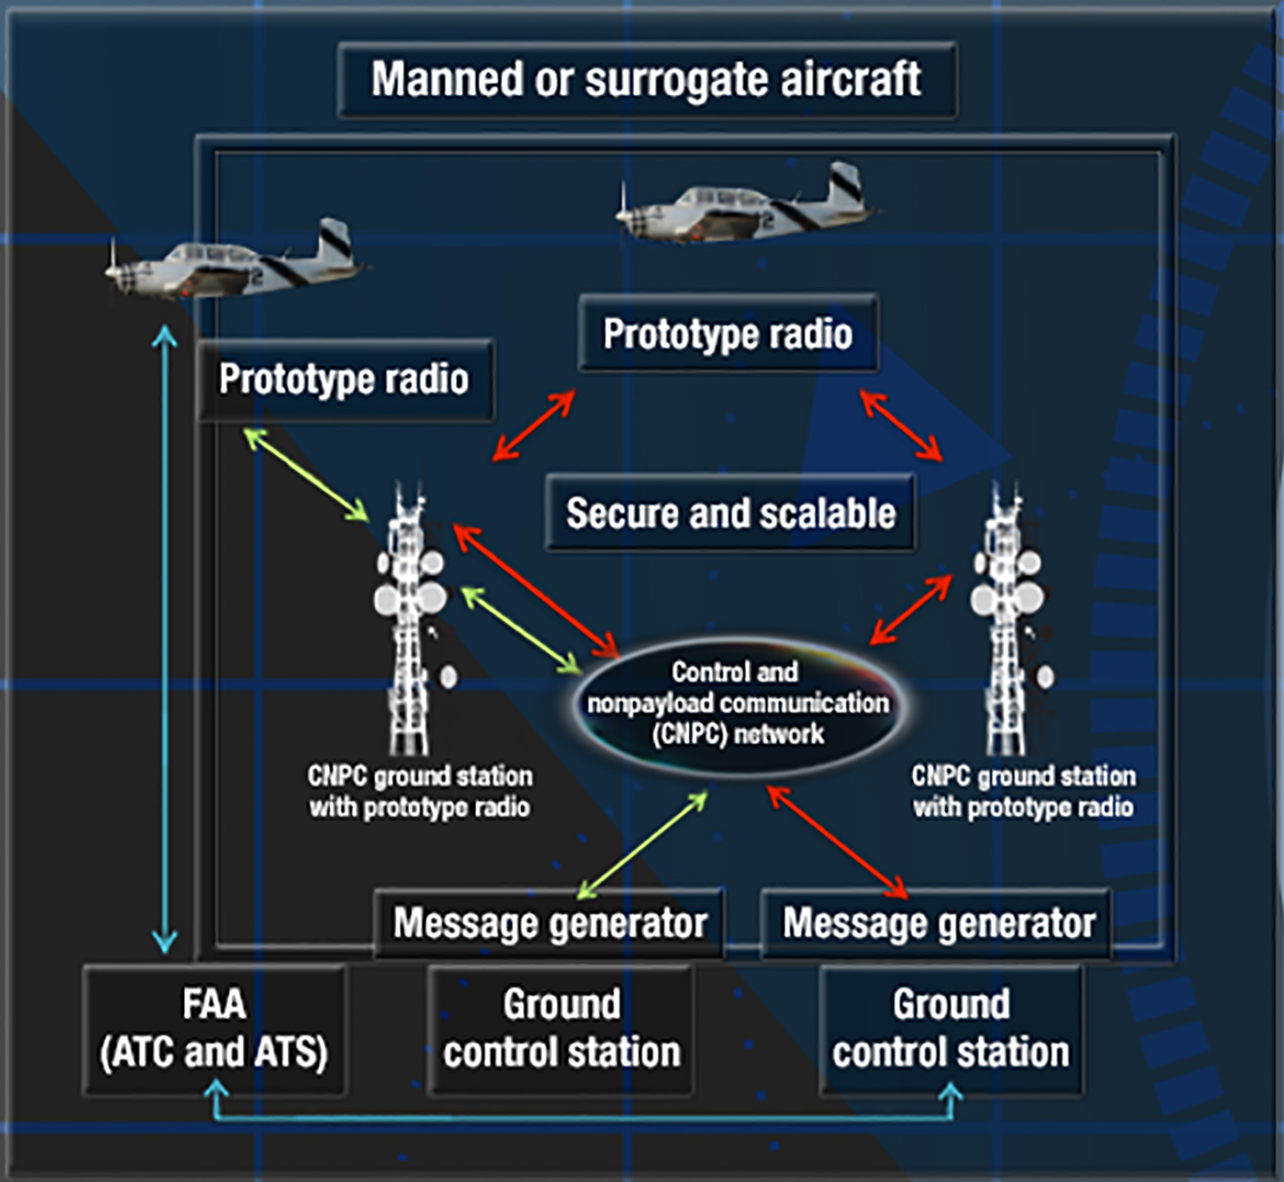 Manned or Surrogate Aircraft graphic